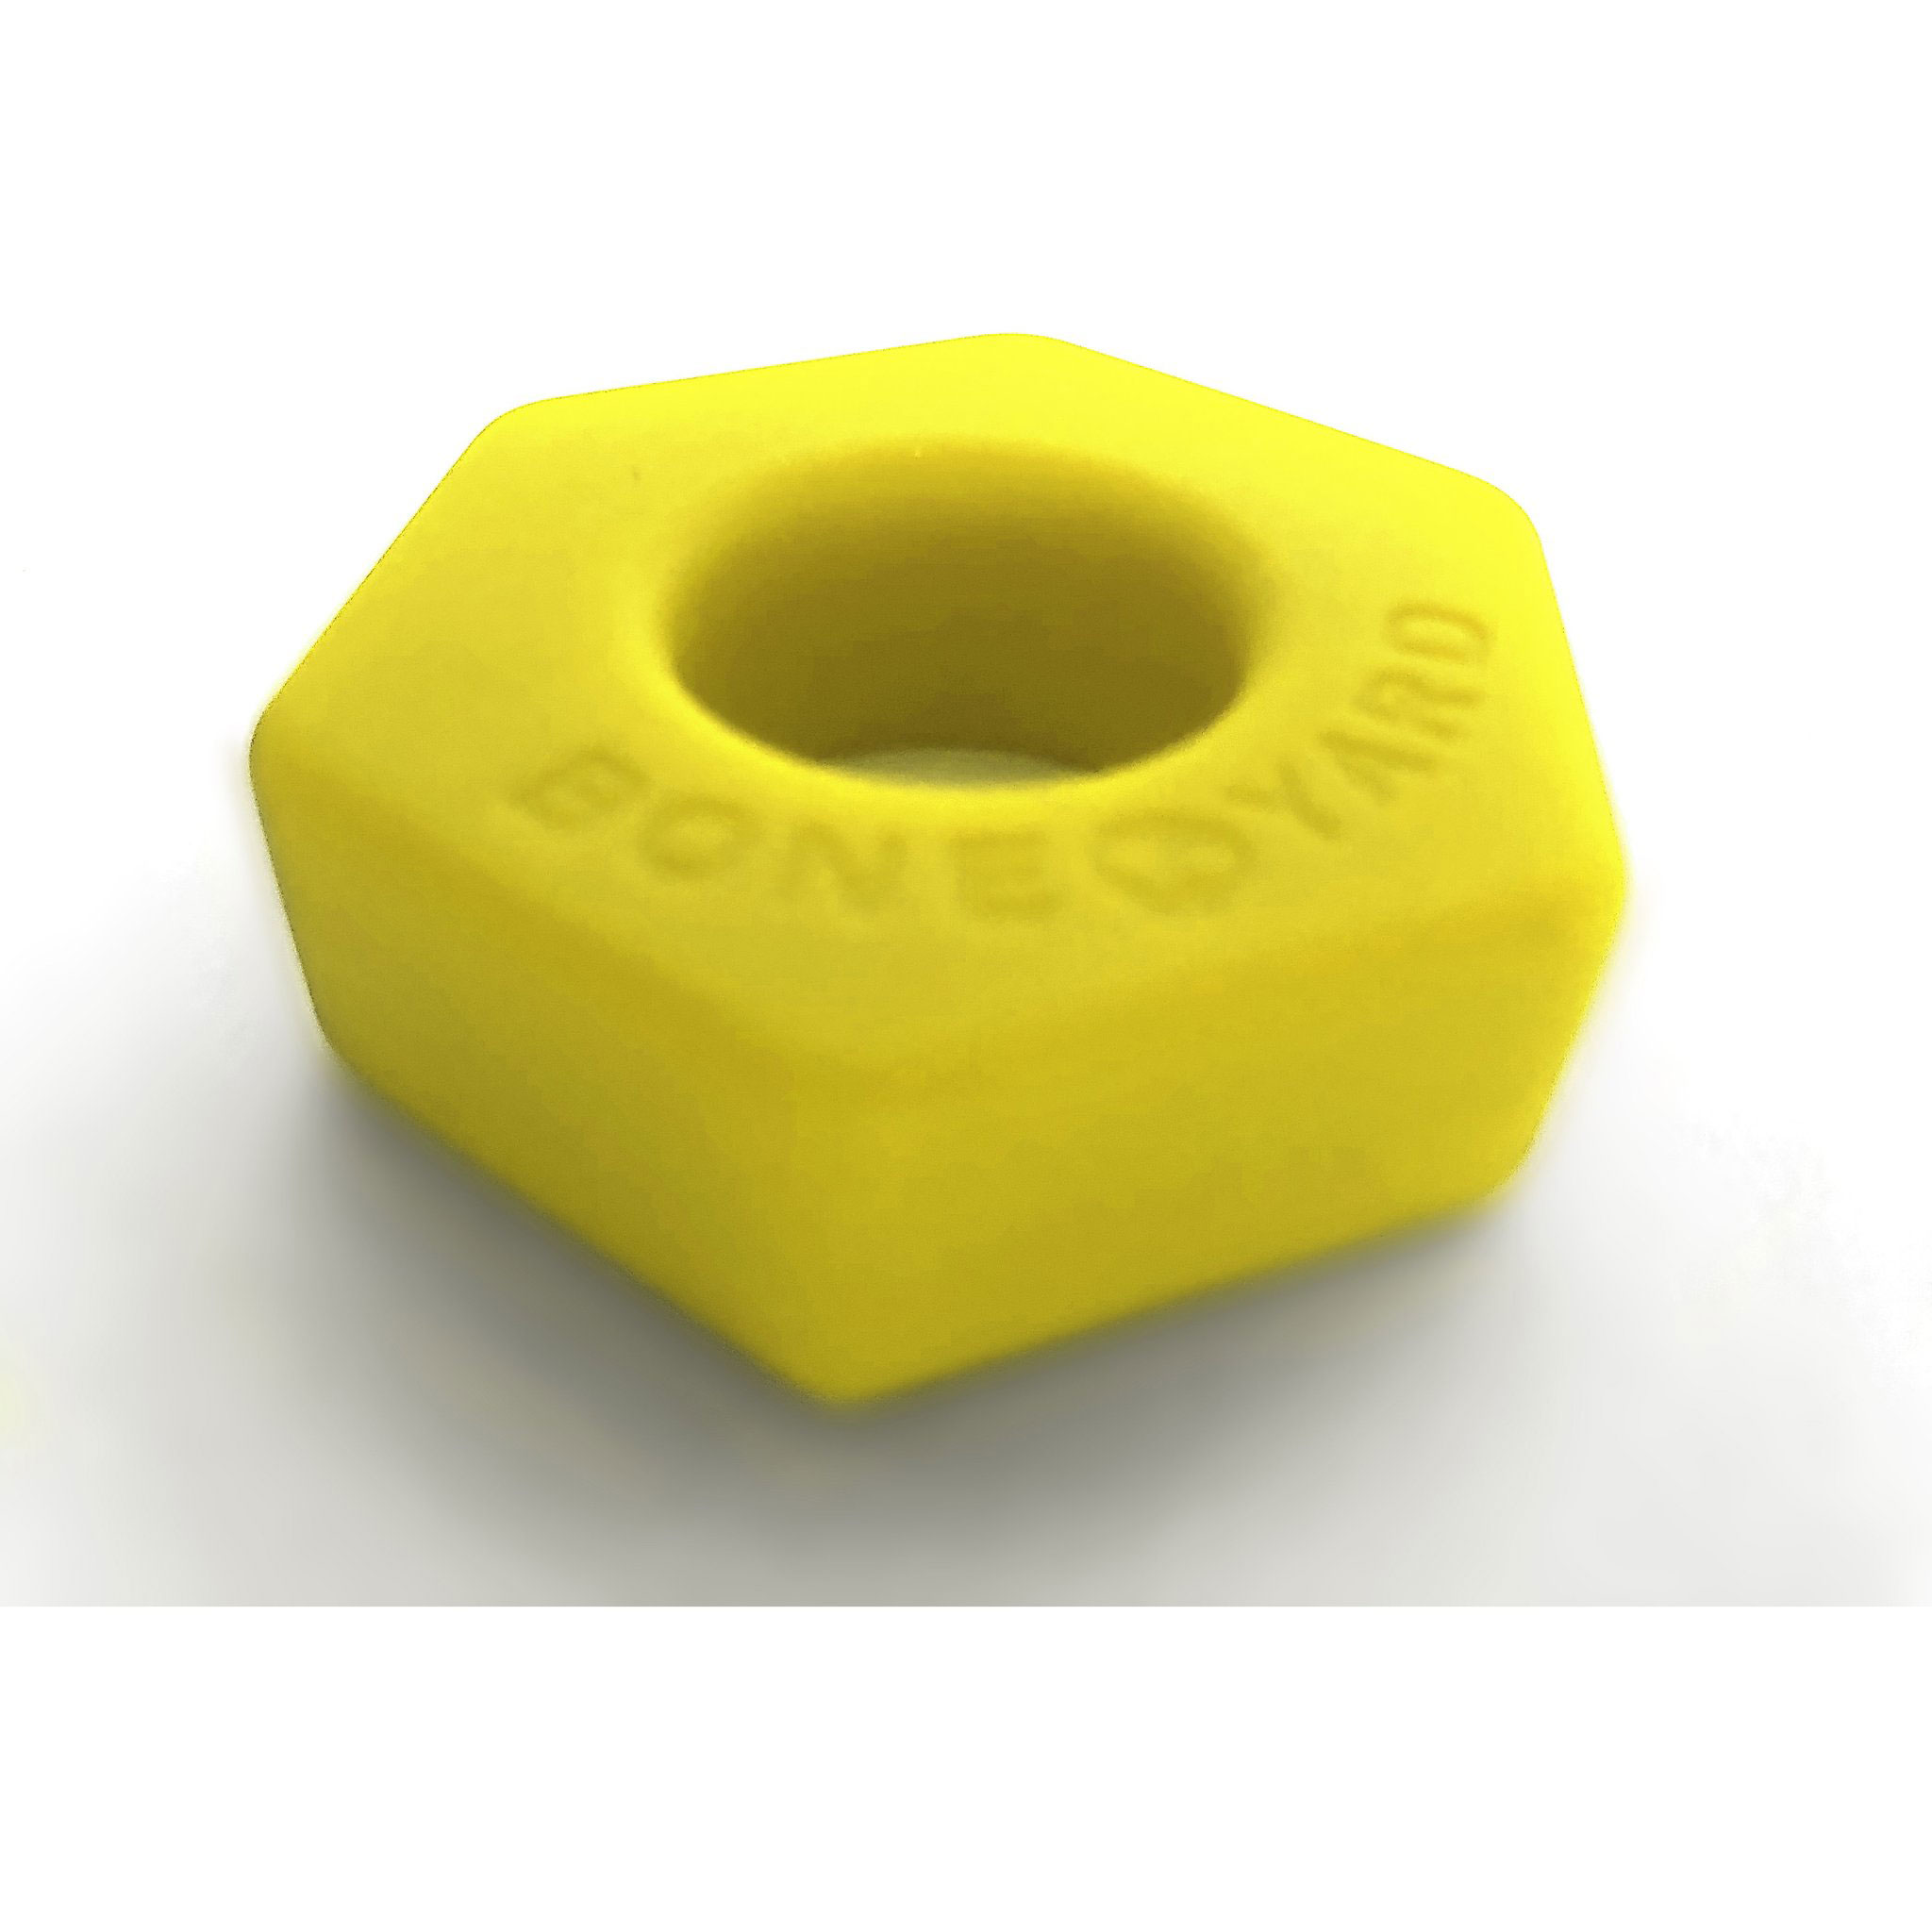 bust a nut cock ring yellow 